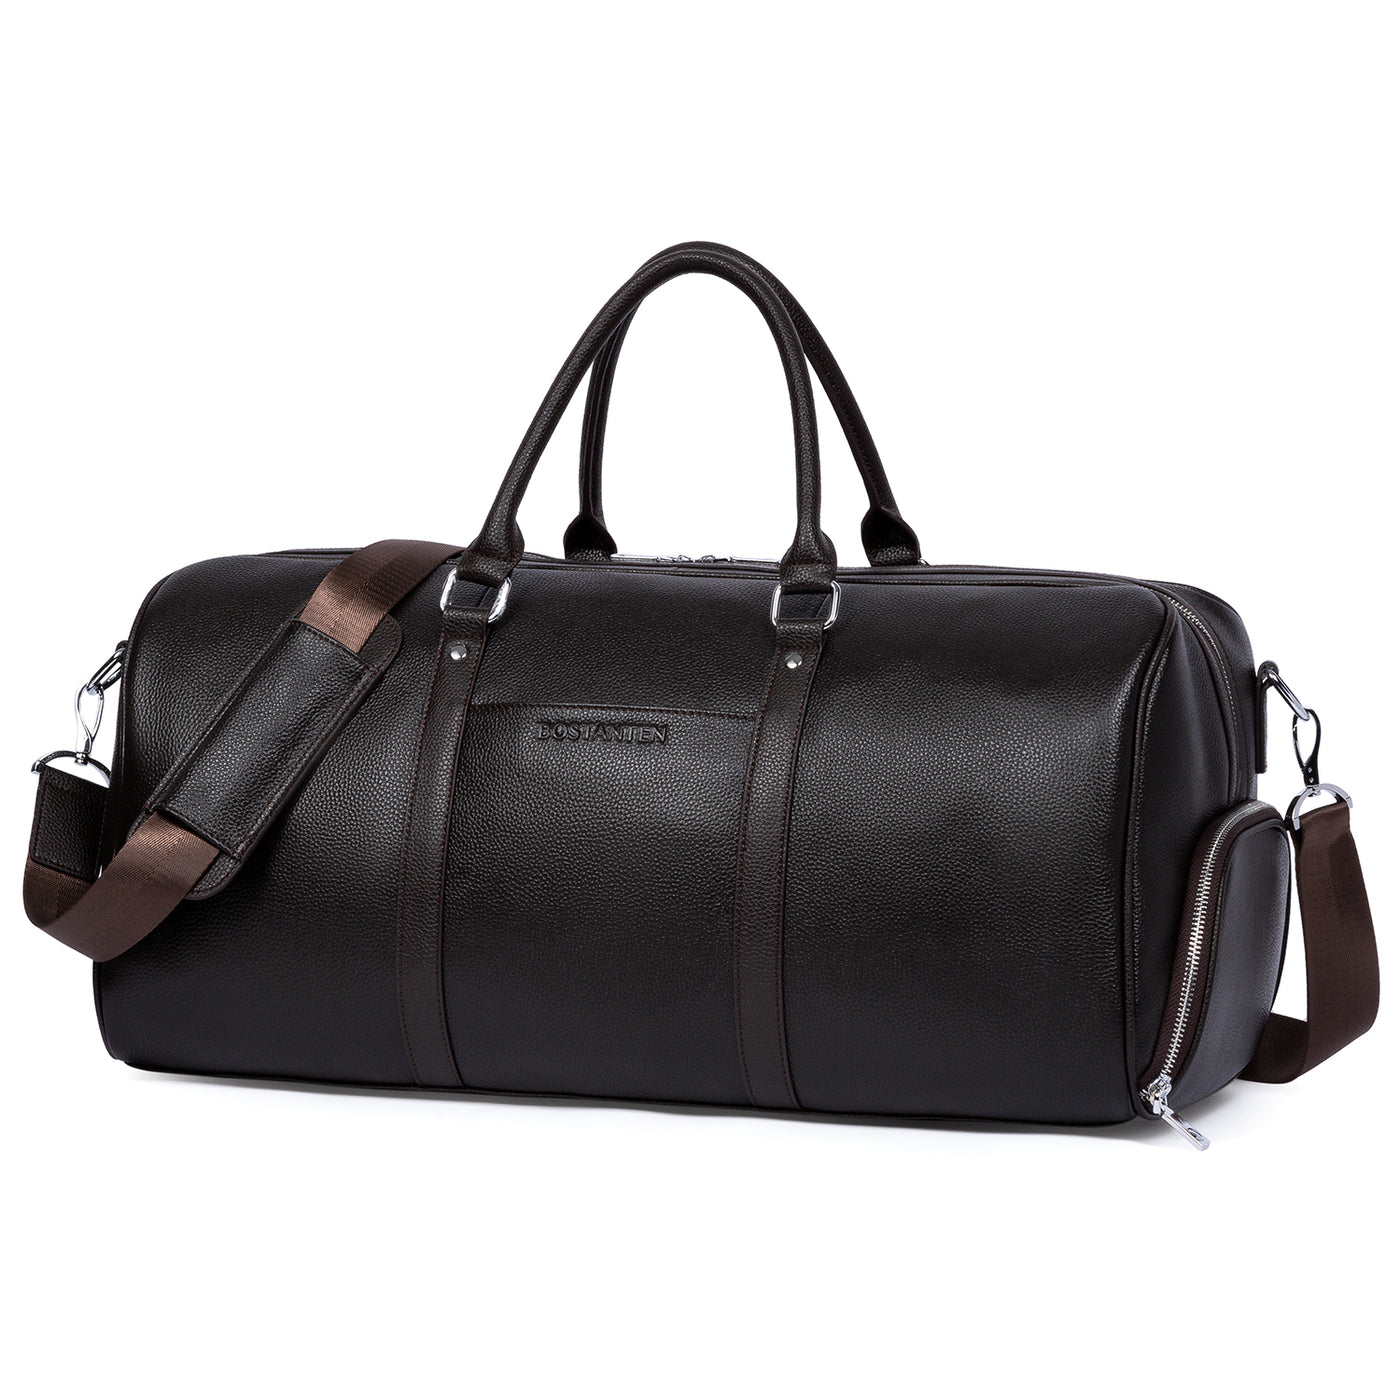 Leather Duffle Bag Men's Overnight Bag Leather Duffel 